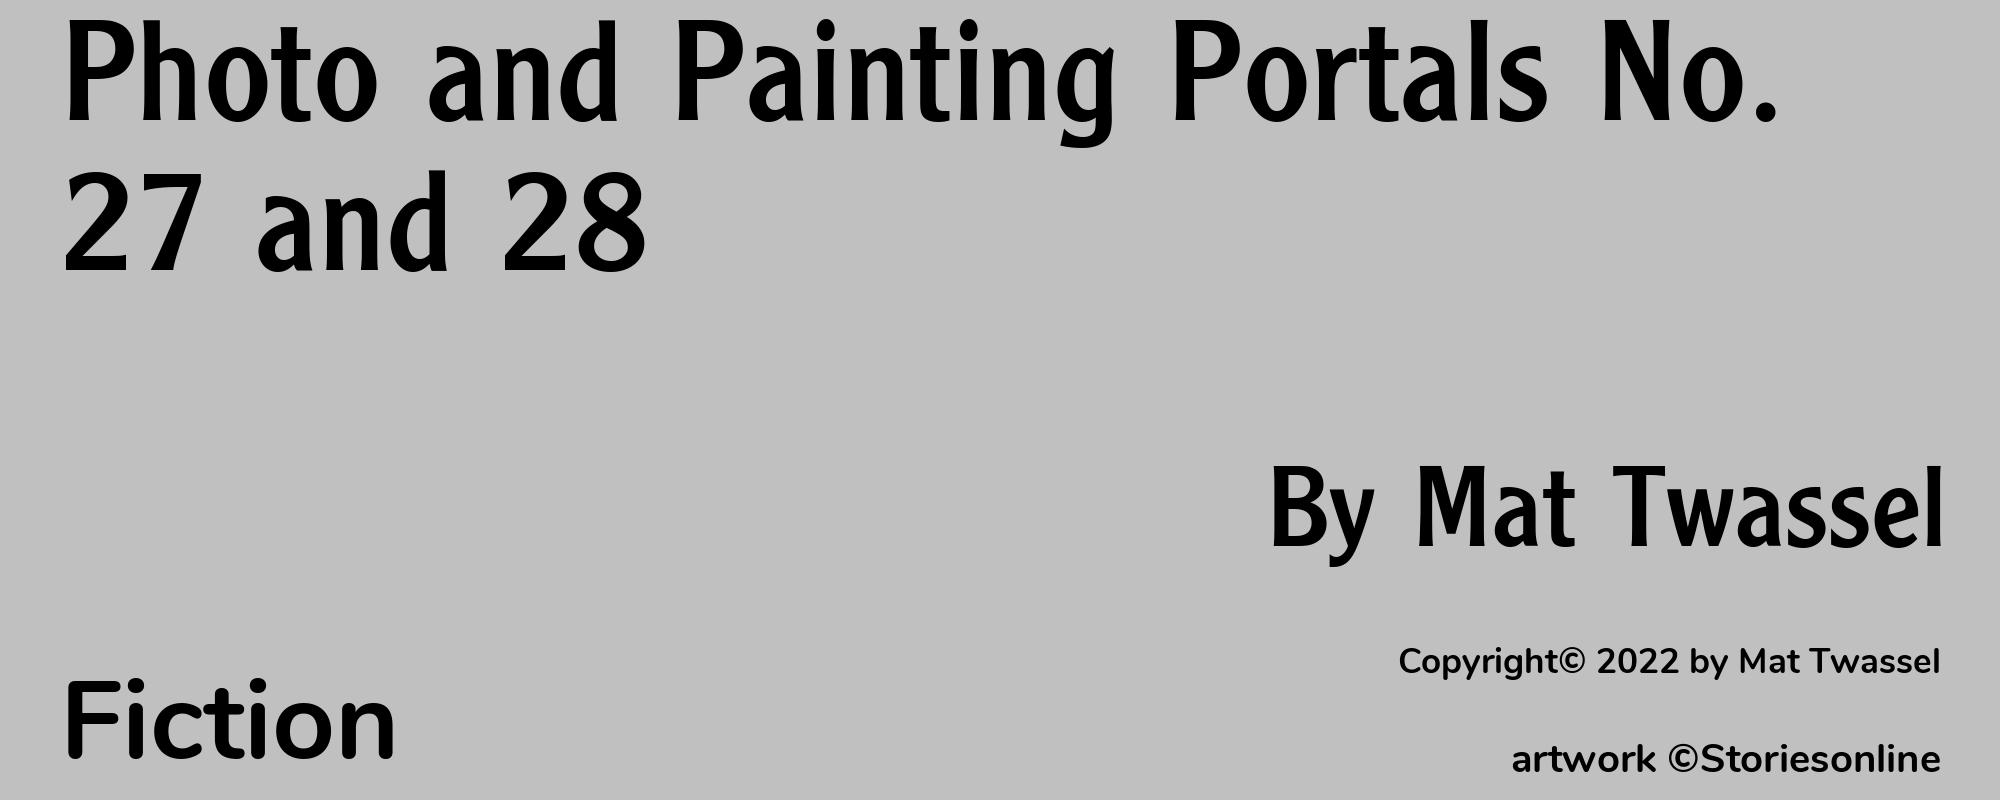 Photo and Painting Portals No. 27 and 28 - Cover